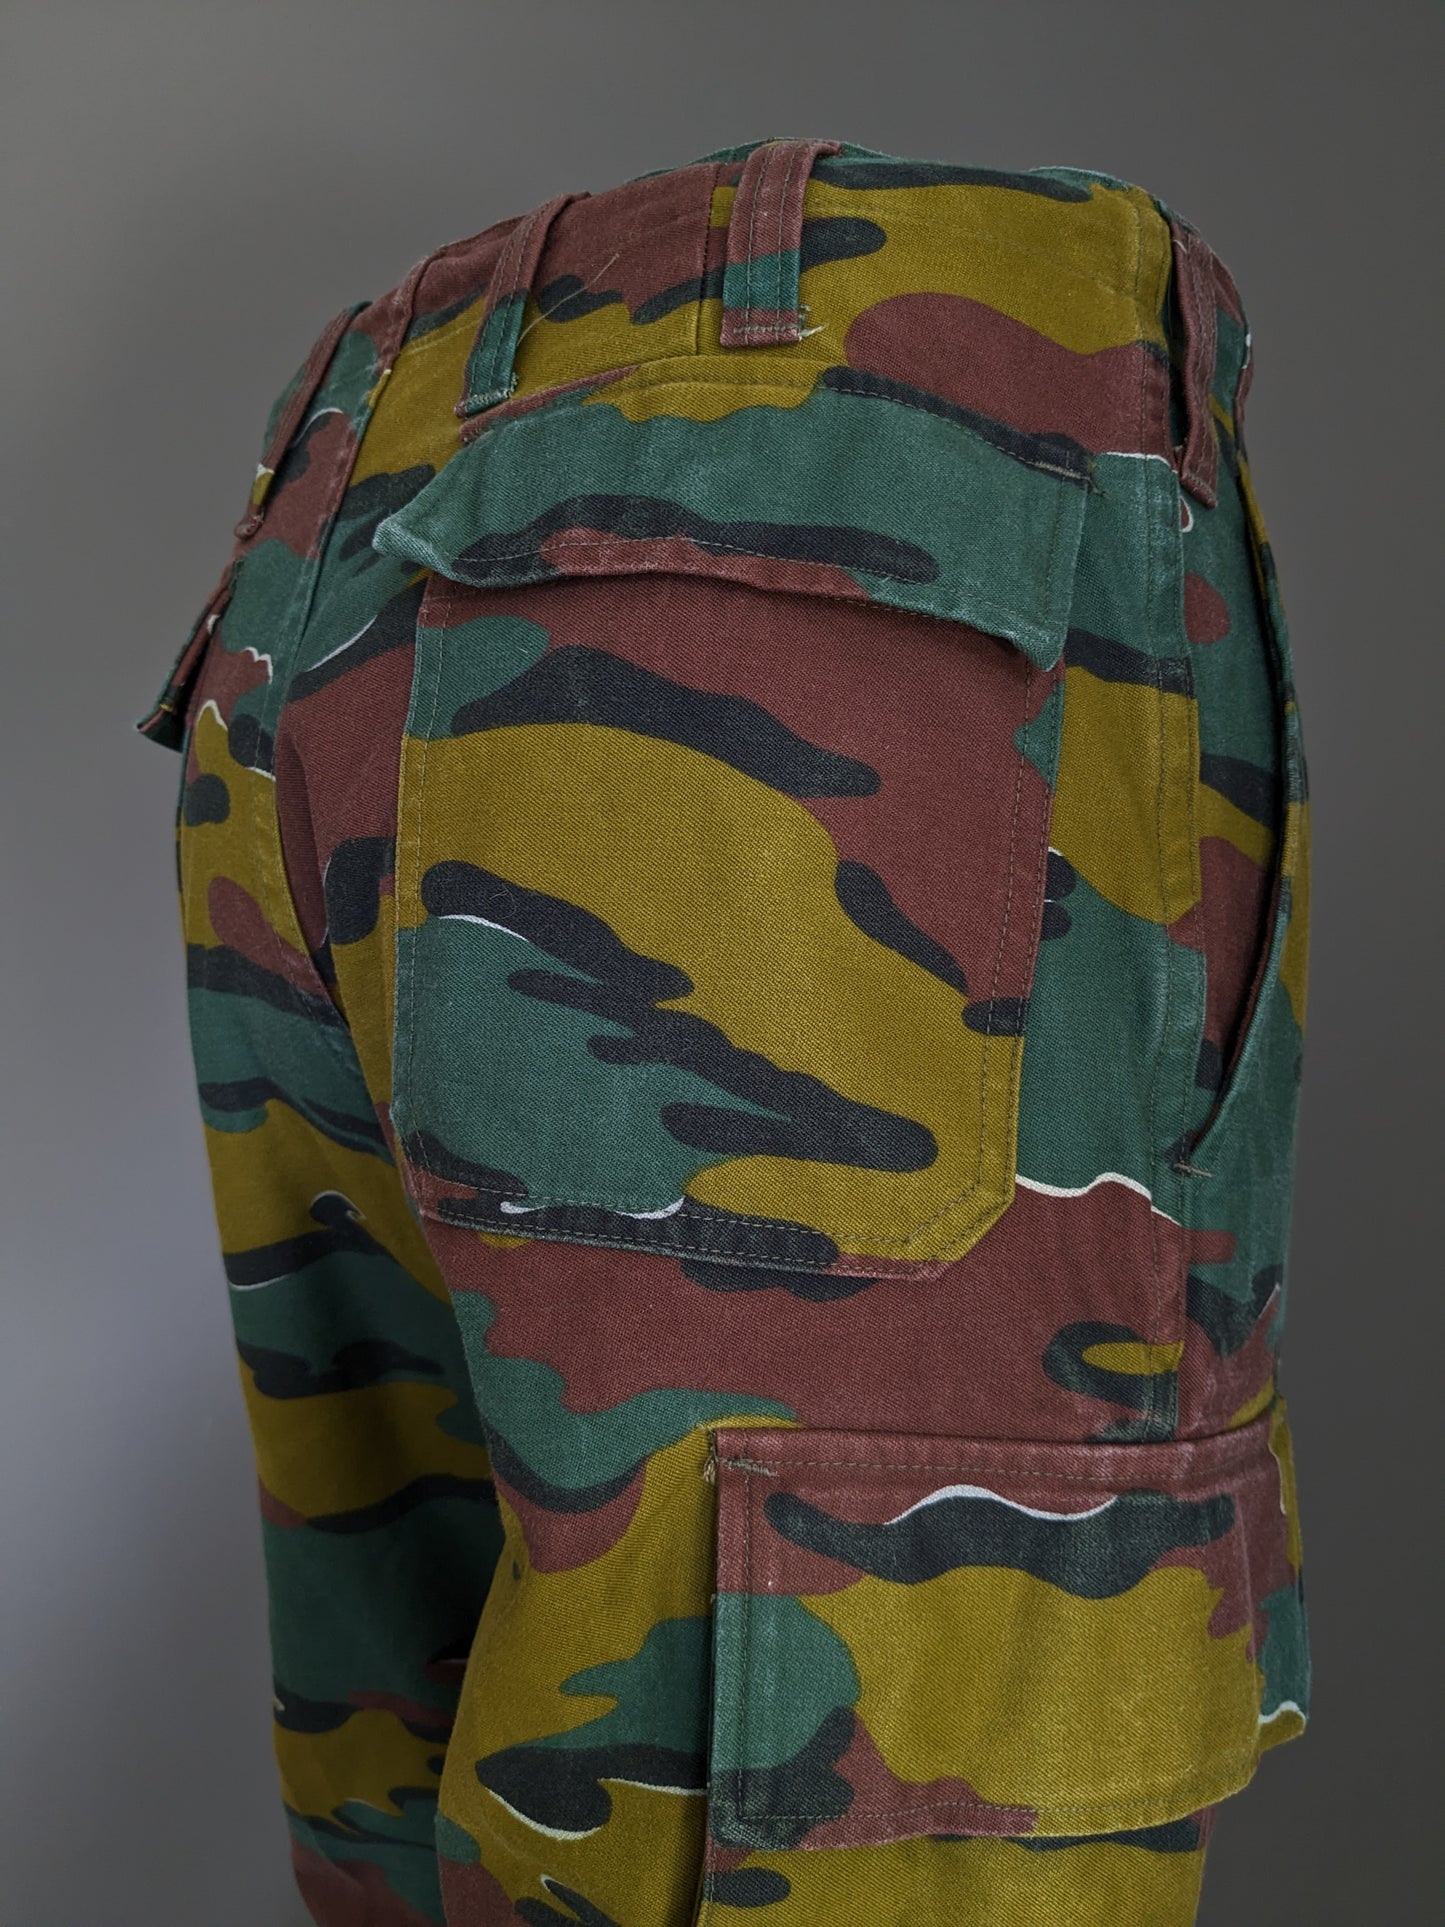 Army / army pants. Brown green camouflage print. Size M / L.